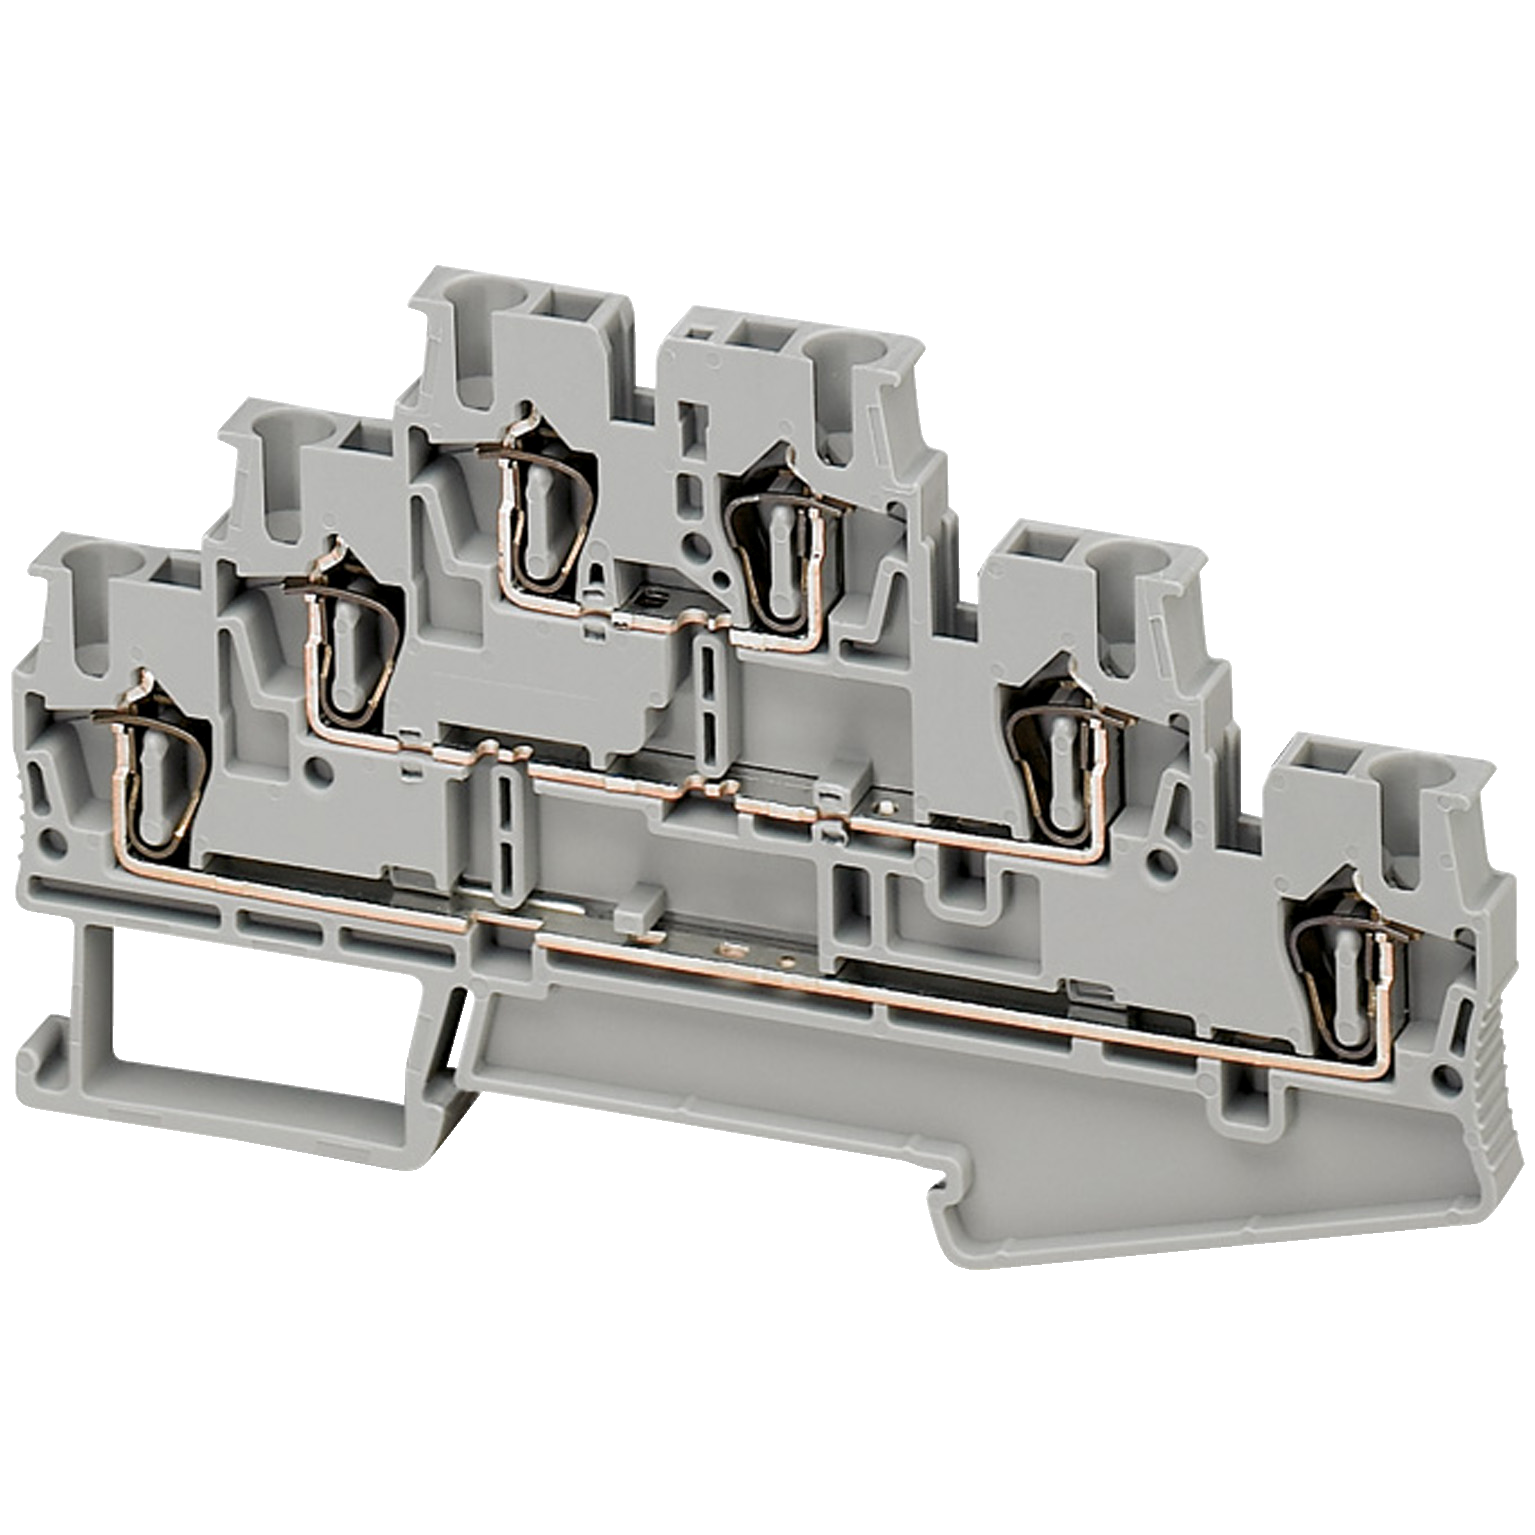 Terminal block, Linergy TR, spring type, feed through, 3 levels connected, 6 points, 2.5mm², blue, set of 50